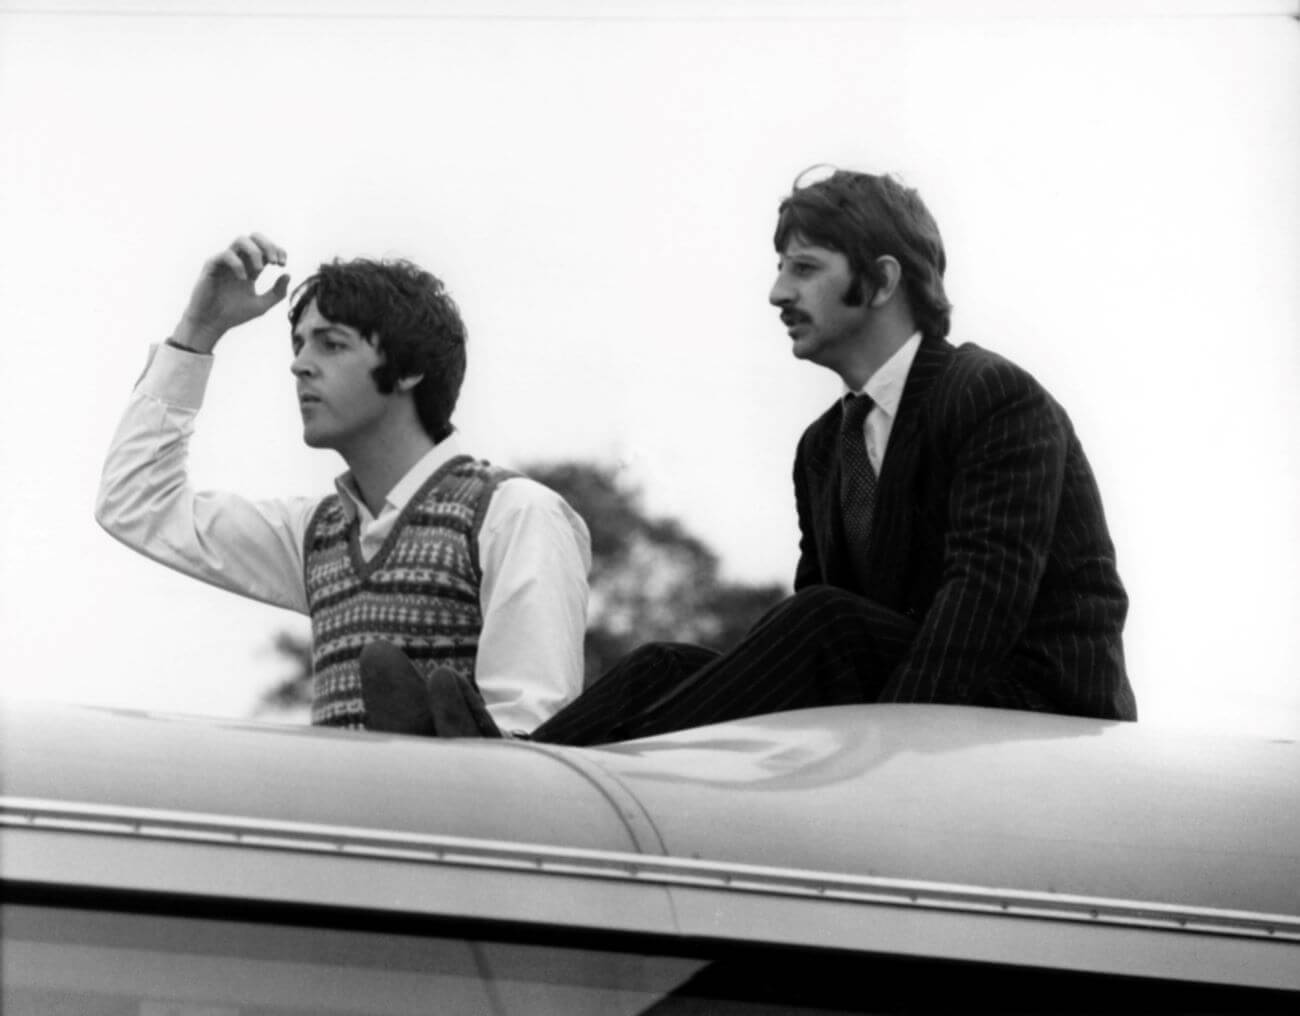 A black and white picture of Paul McCartney and Ringo Starr sitting on top of a bus.